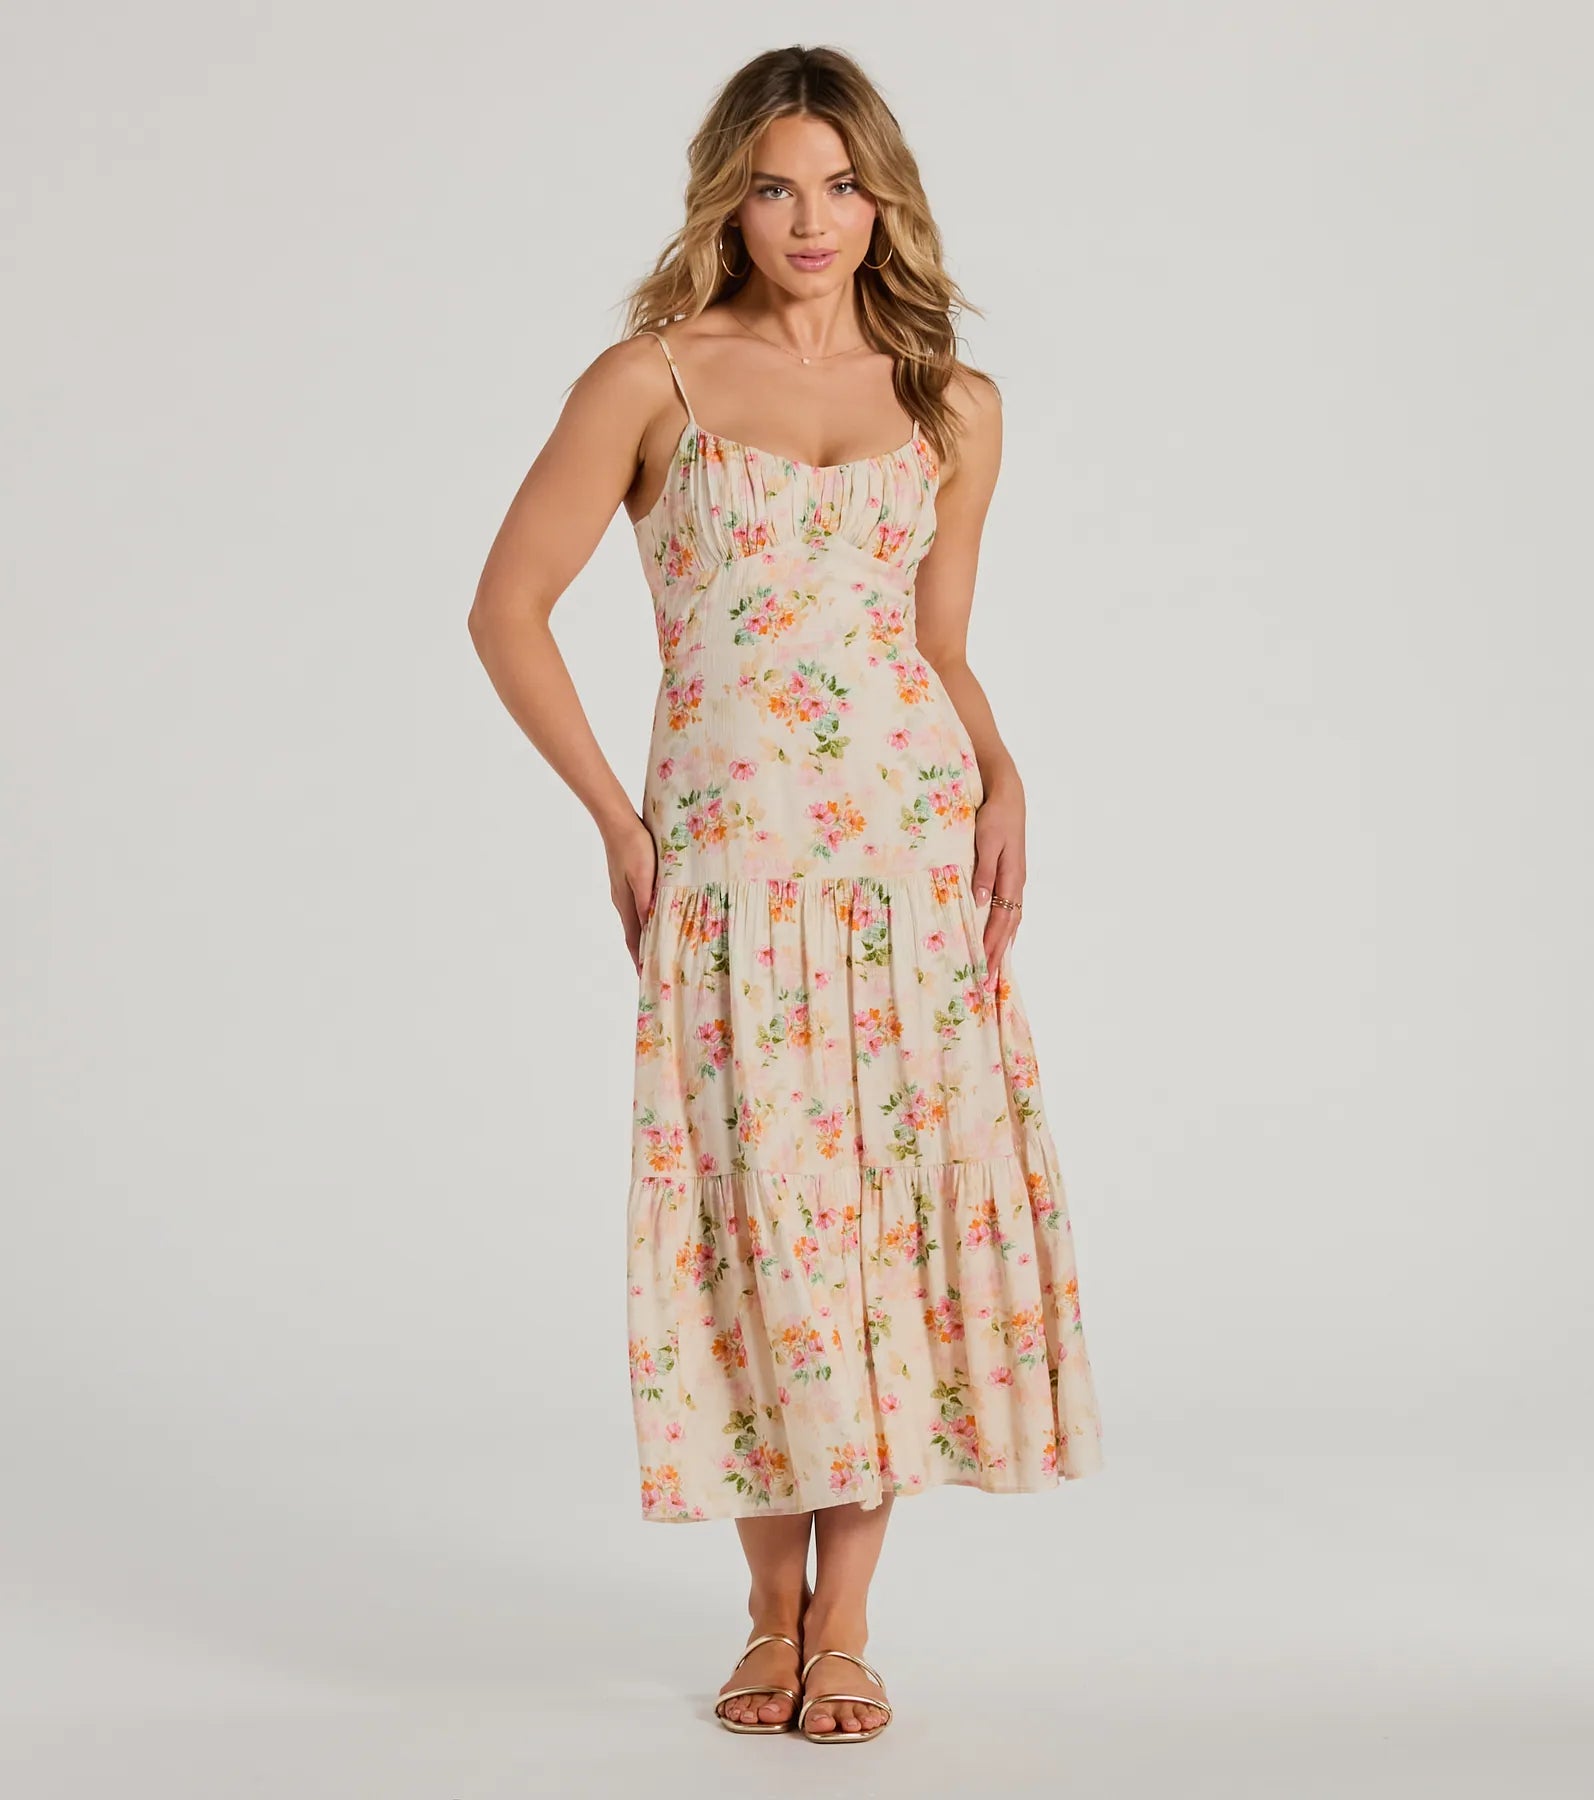 Chiffon Floral Print Back Zipper Flowy Lace-Up Cocktail Spaghetti Strap Scoop Neck Midi Dress With Ruffles